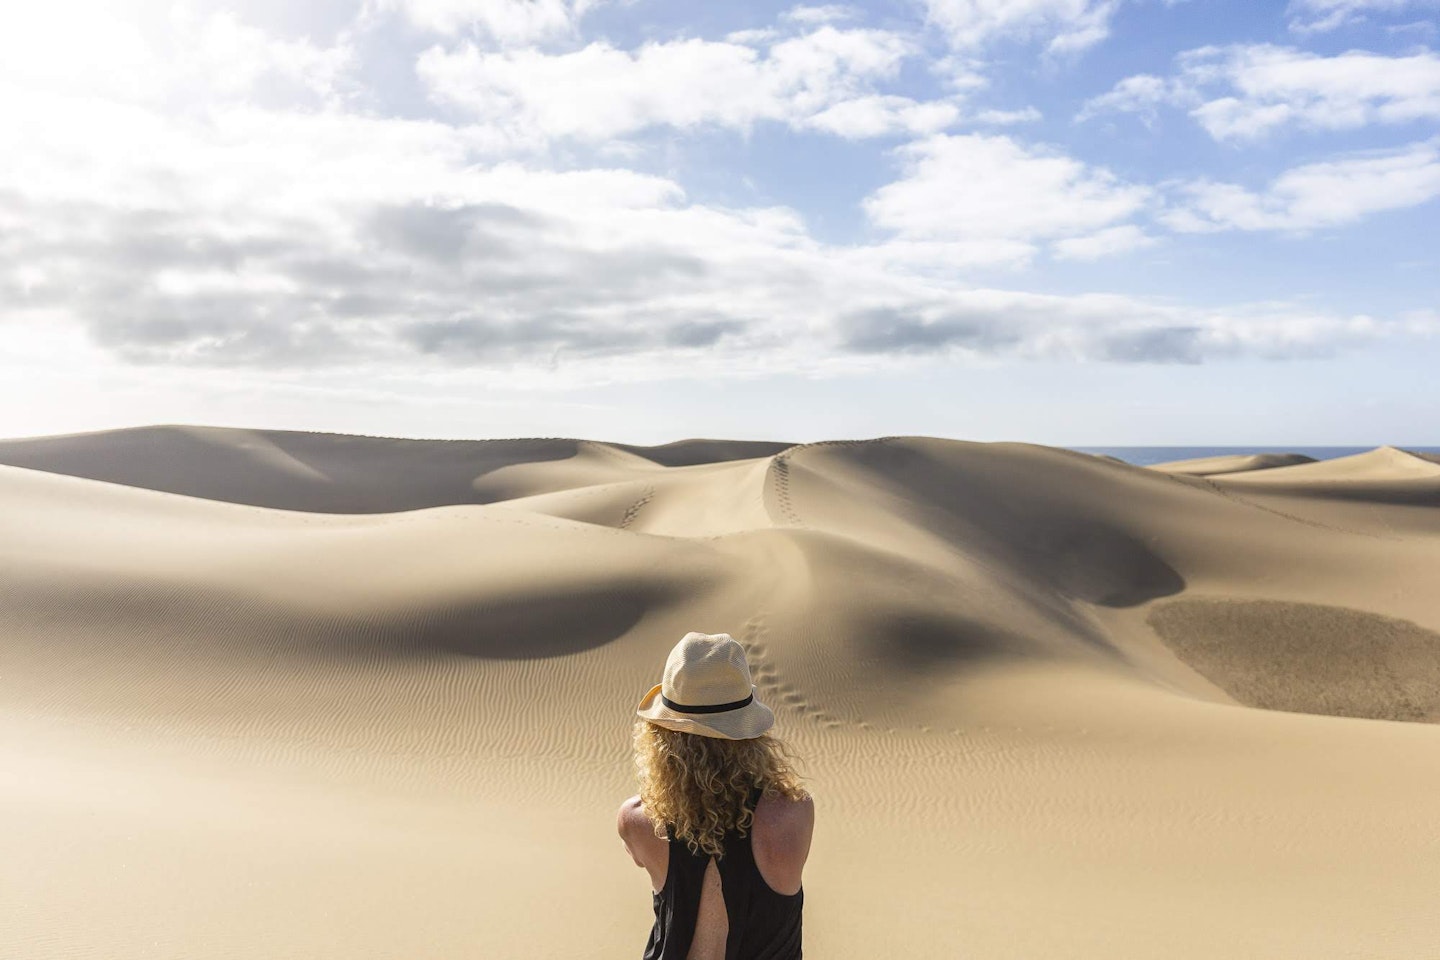 "Caron's story about her 4-day photography art trip in the beautiful Canary Islands | Slow travel experience for creatives via Vacation with an Artist.  #vawaa #art #artists #photogrpahy #creativity #travel #spain #education #craft #desert #tourism"